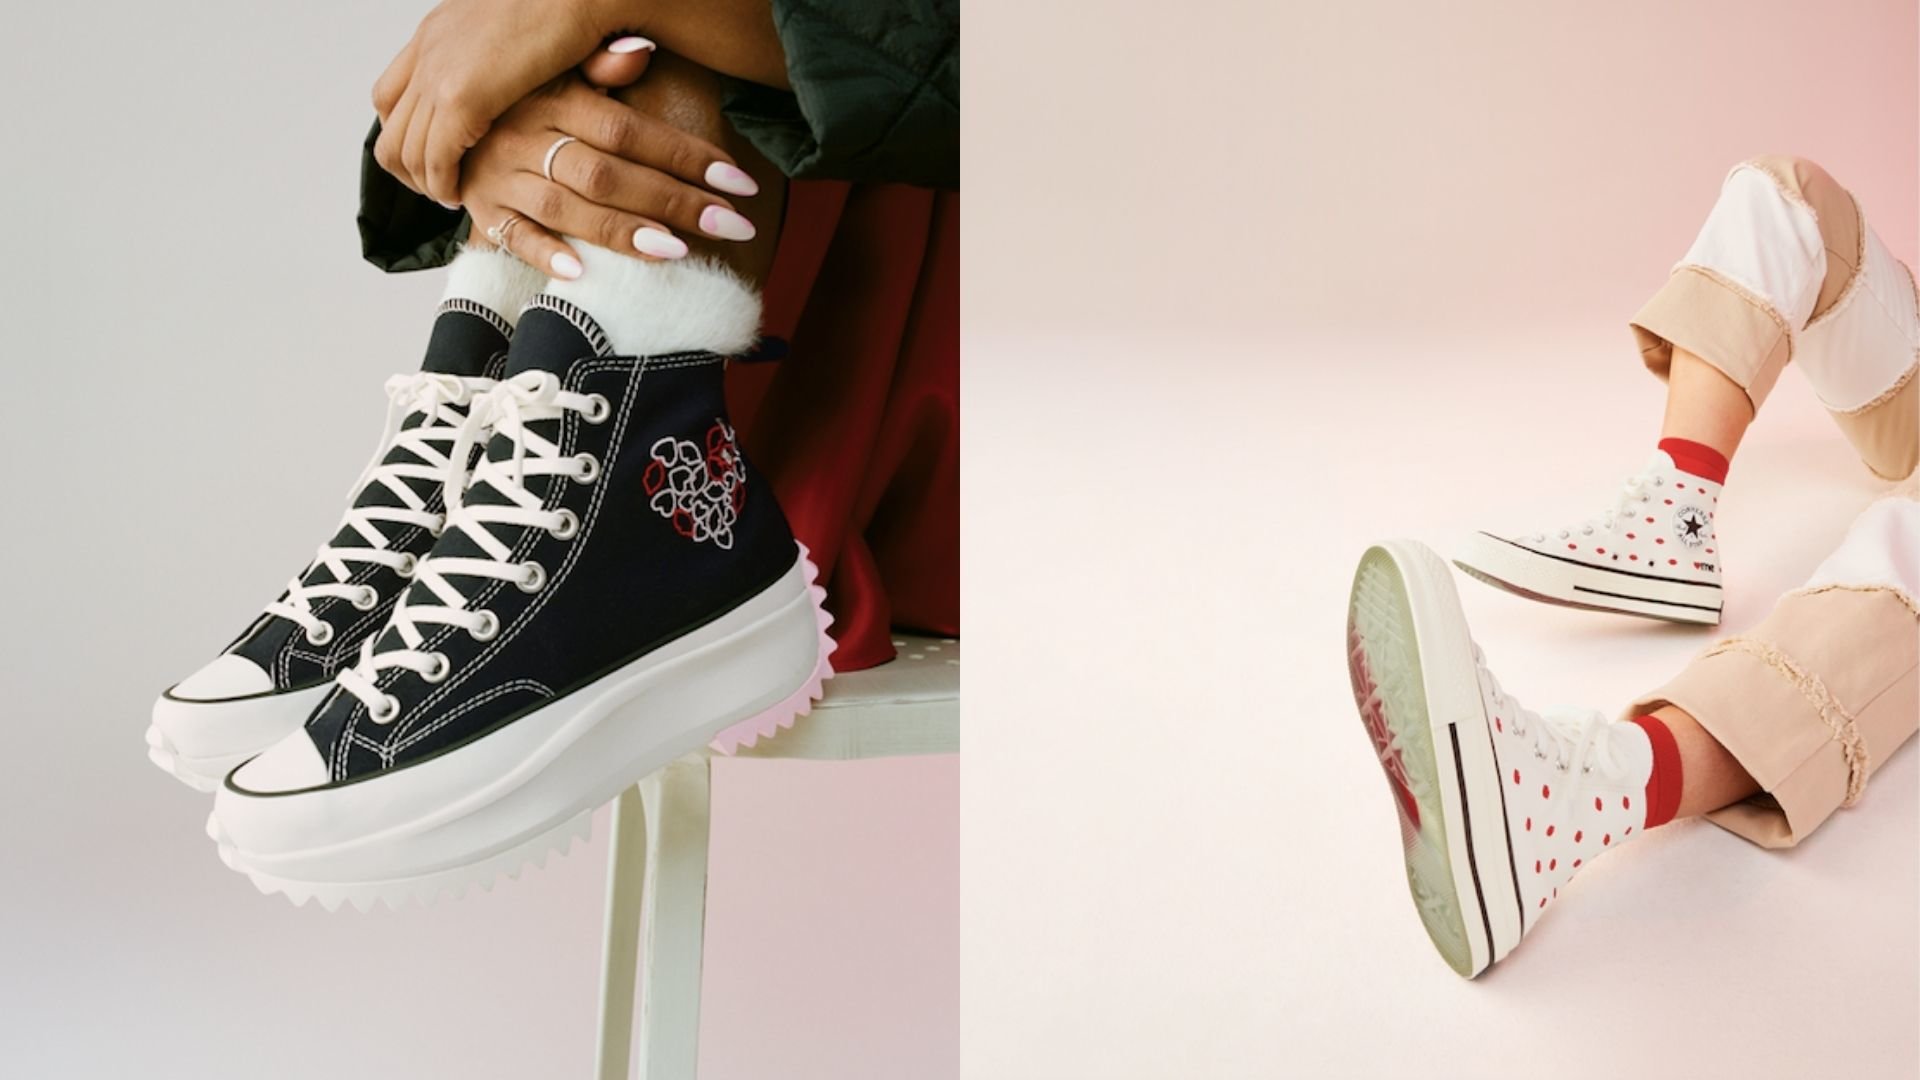 Crafted With Love by Converse: Wear Your Heart on Your Chucks